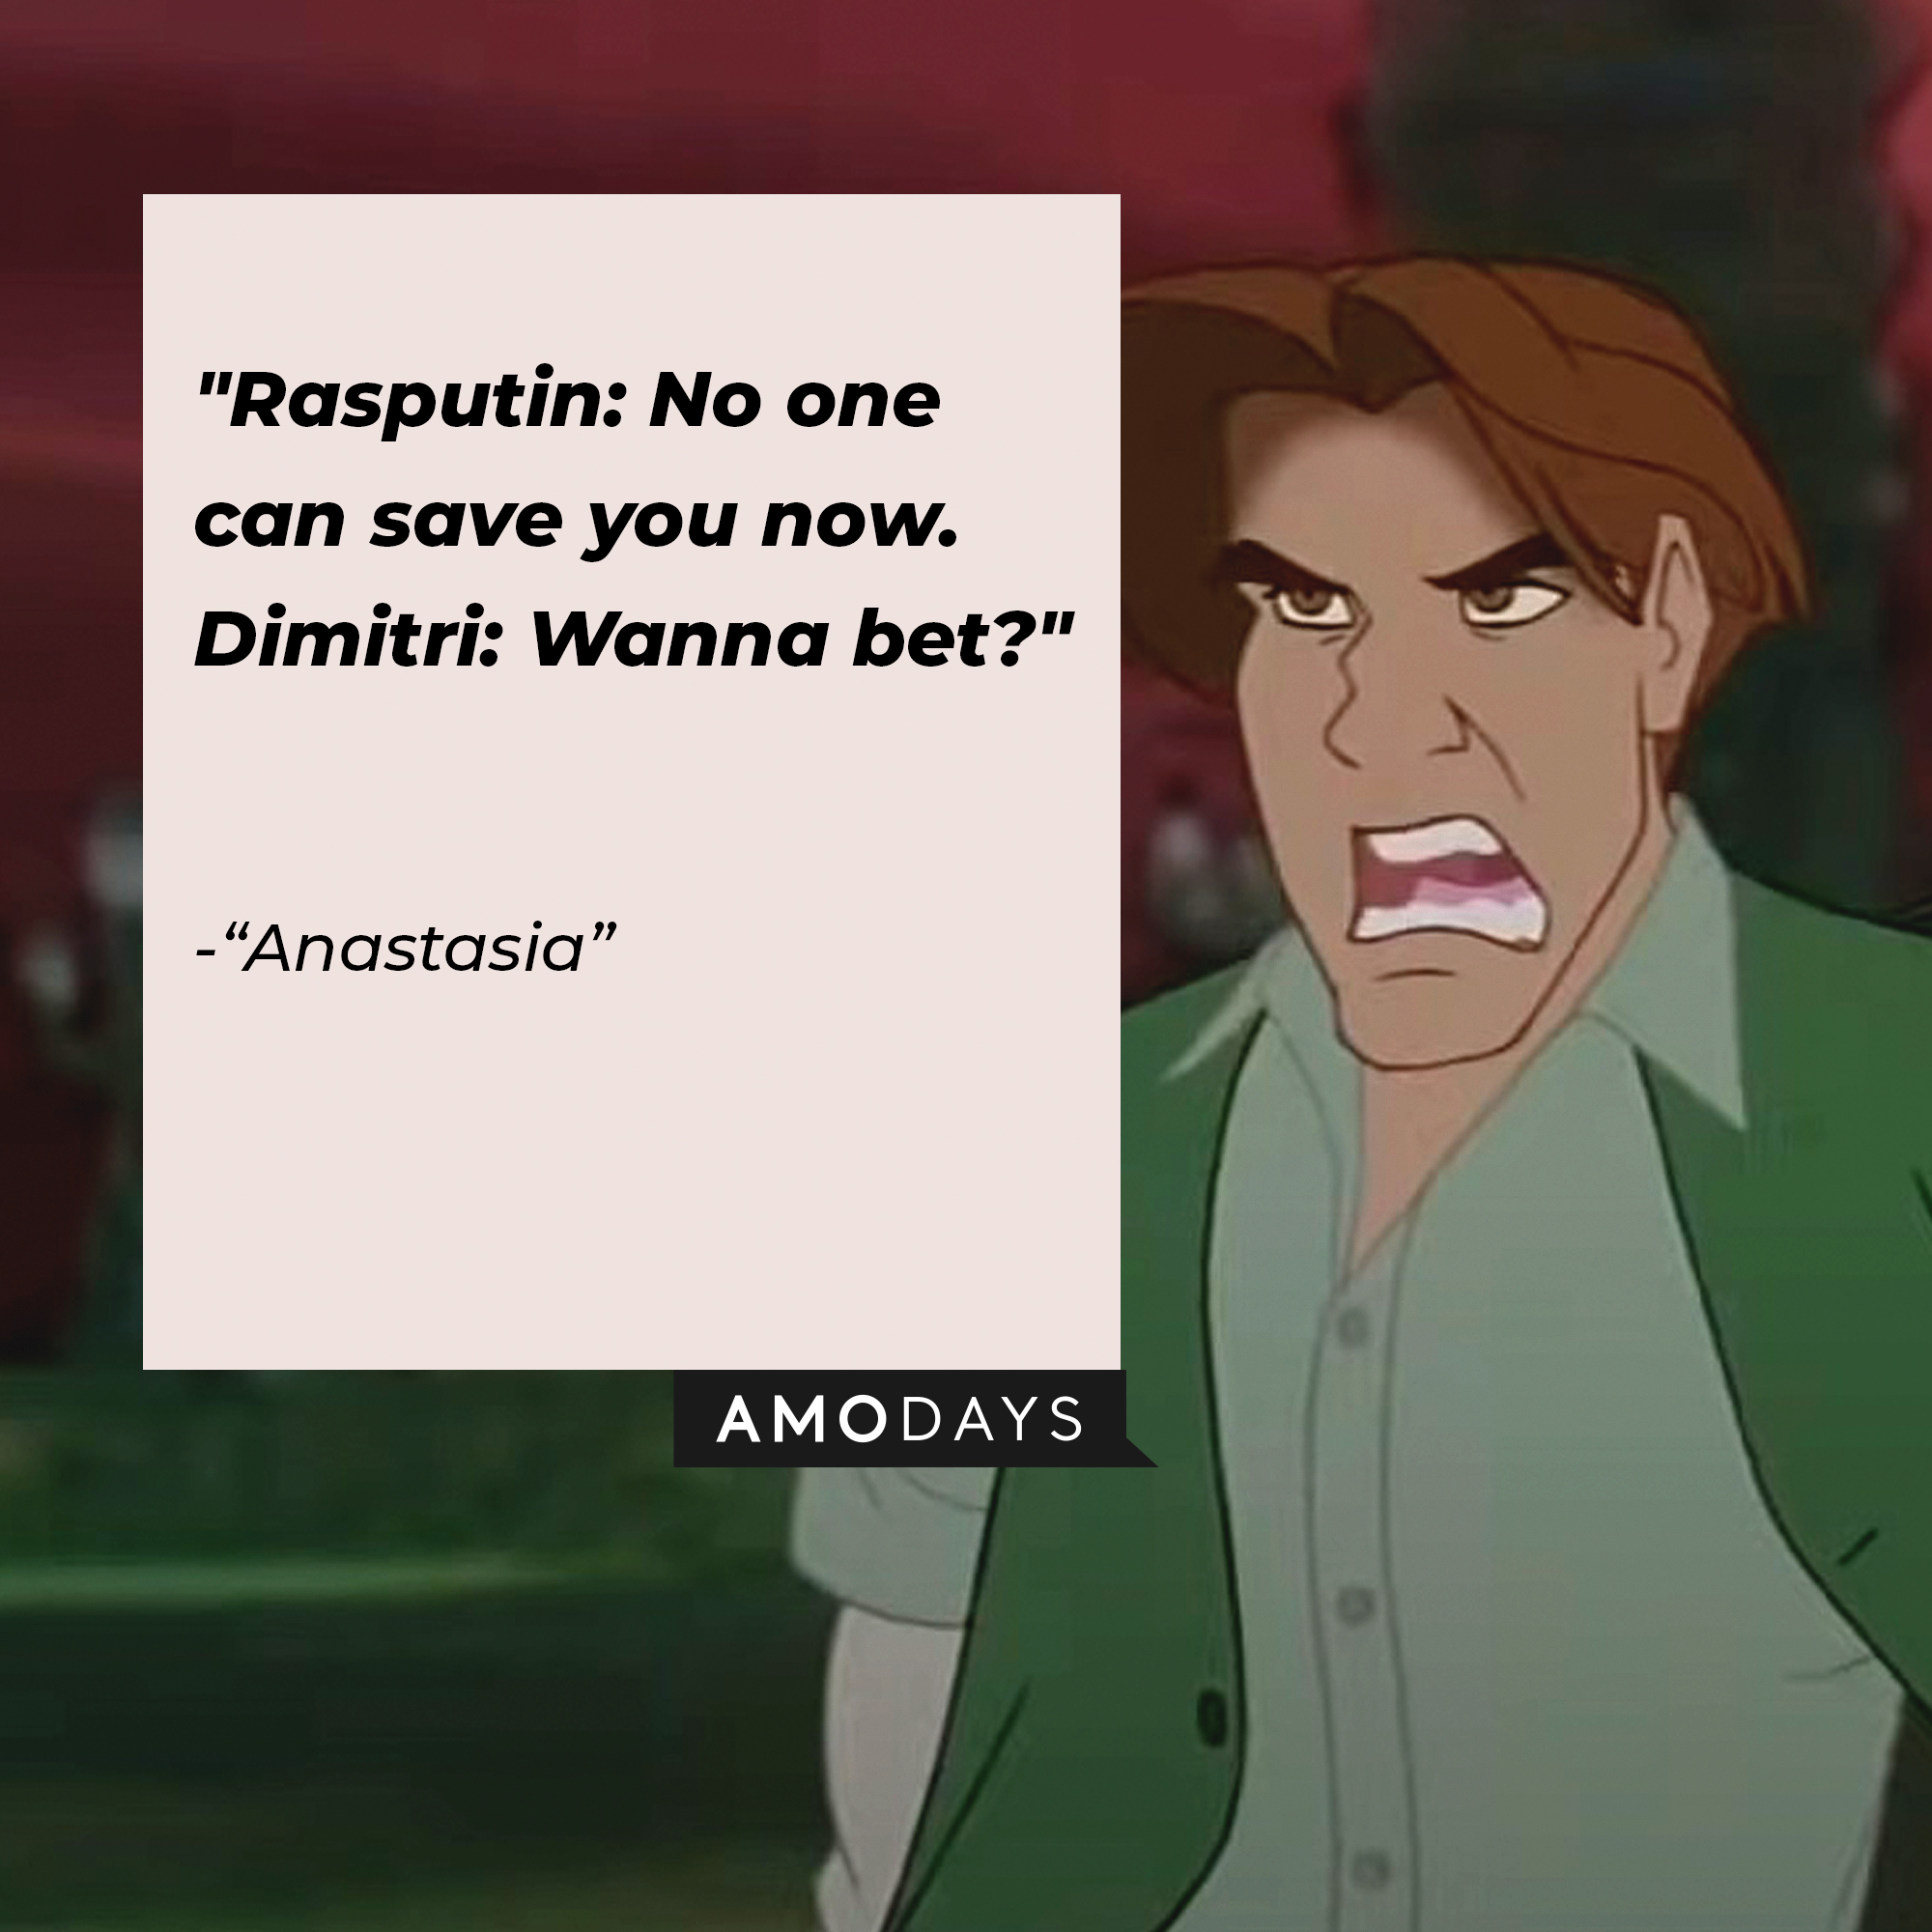 Image of Dimitri with the quote: Rasputin: No one can save you now. Dimitri: Wanna bet?"  | Source: Youtube.com/20thCenturyStudios